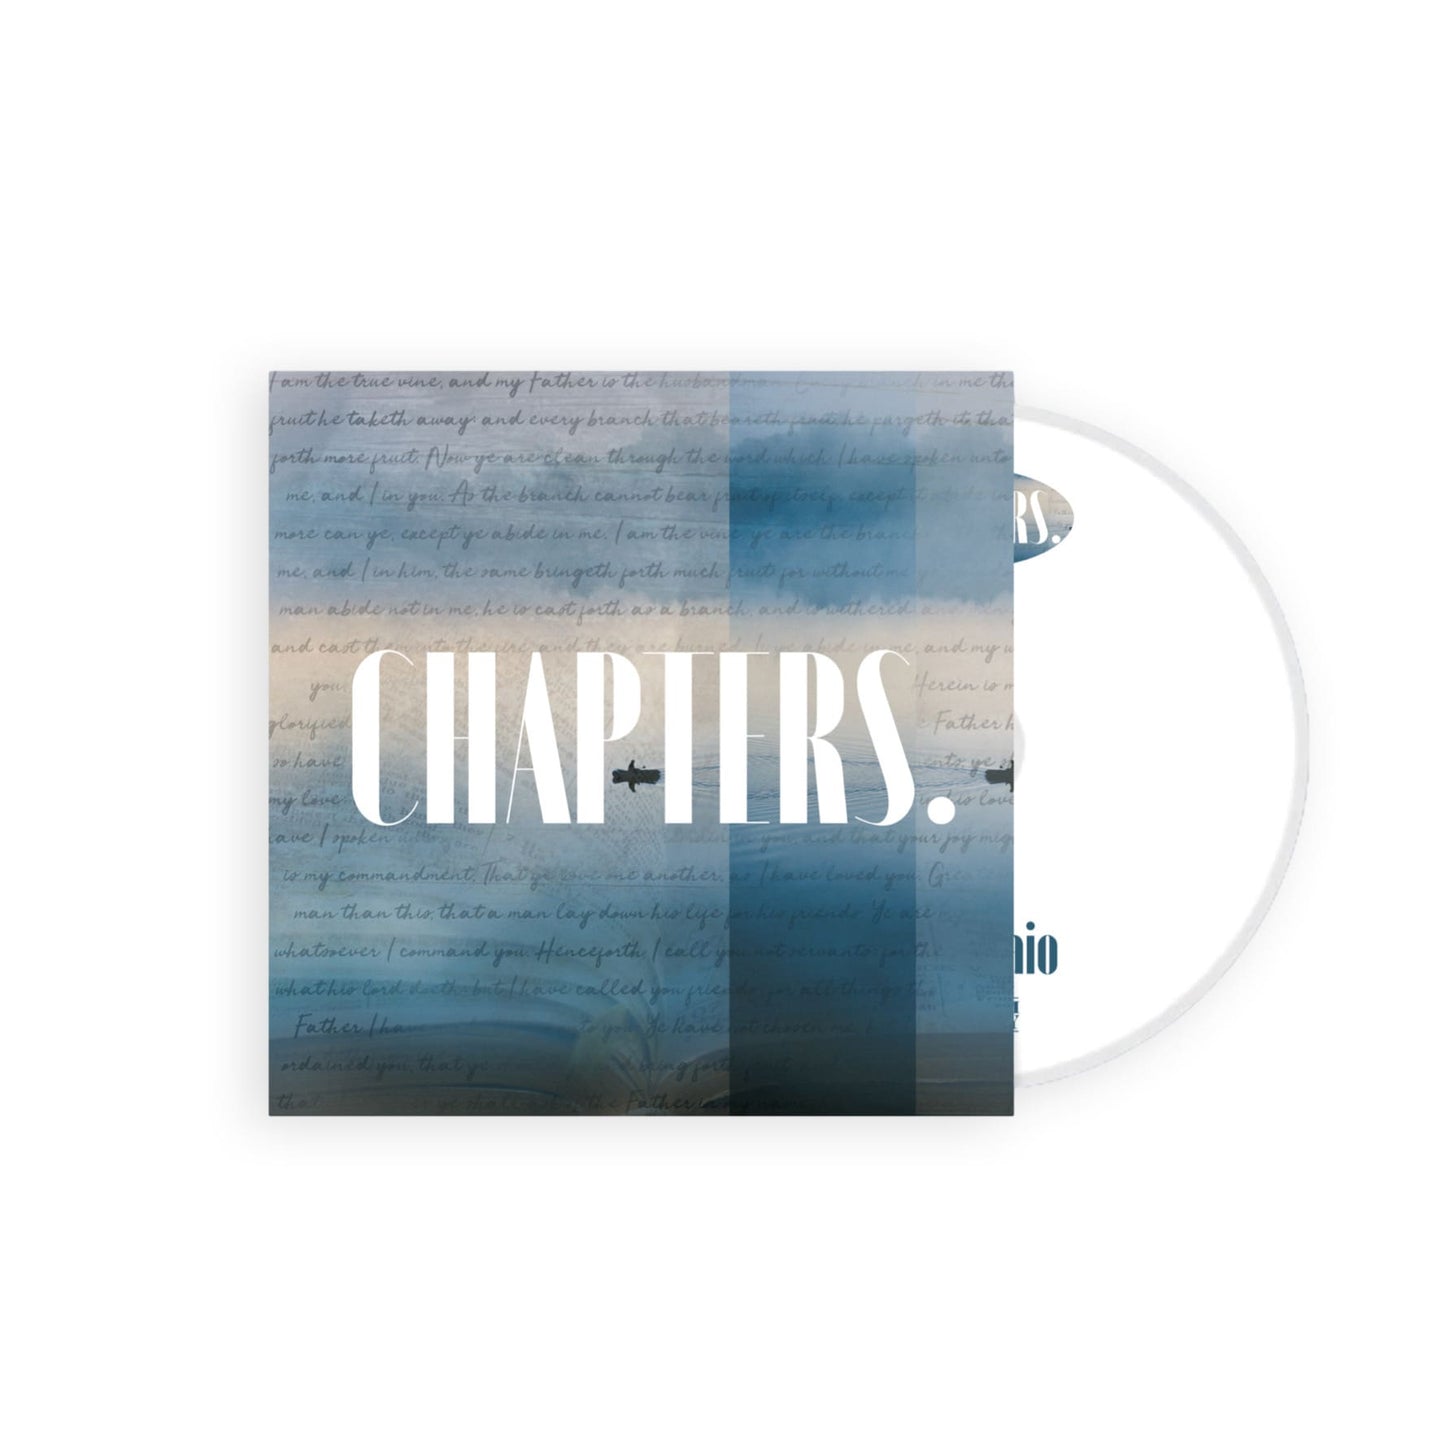 Chapters CD